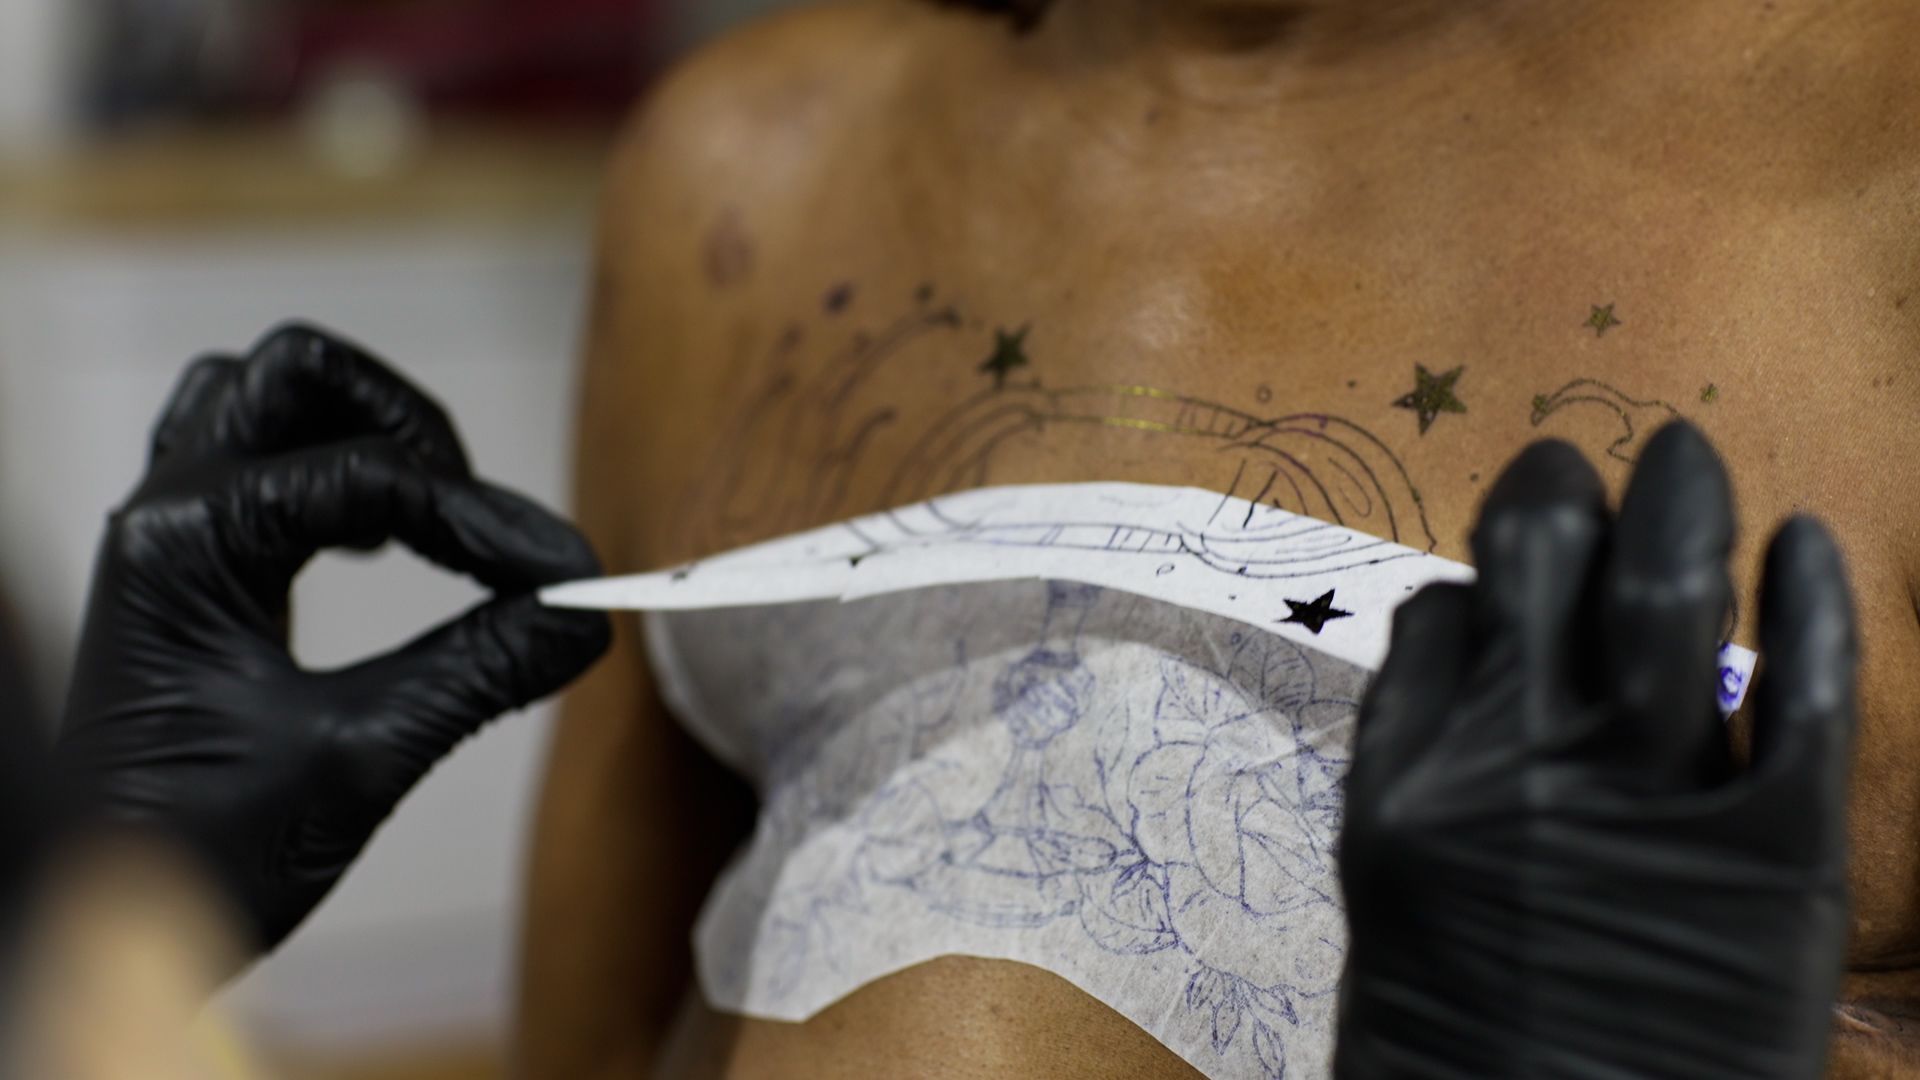 Artist Gives Free Tattoos To Beautifully Conceal Mastectomy Scars